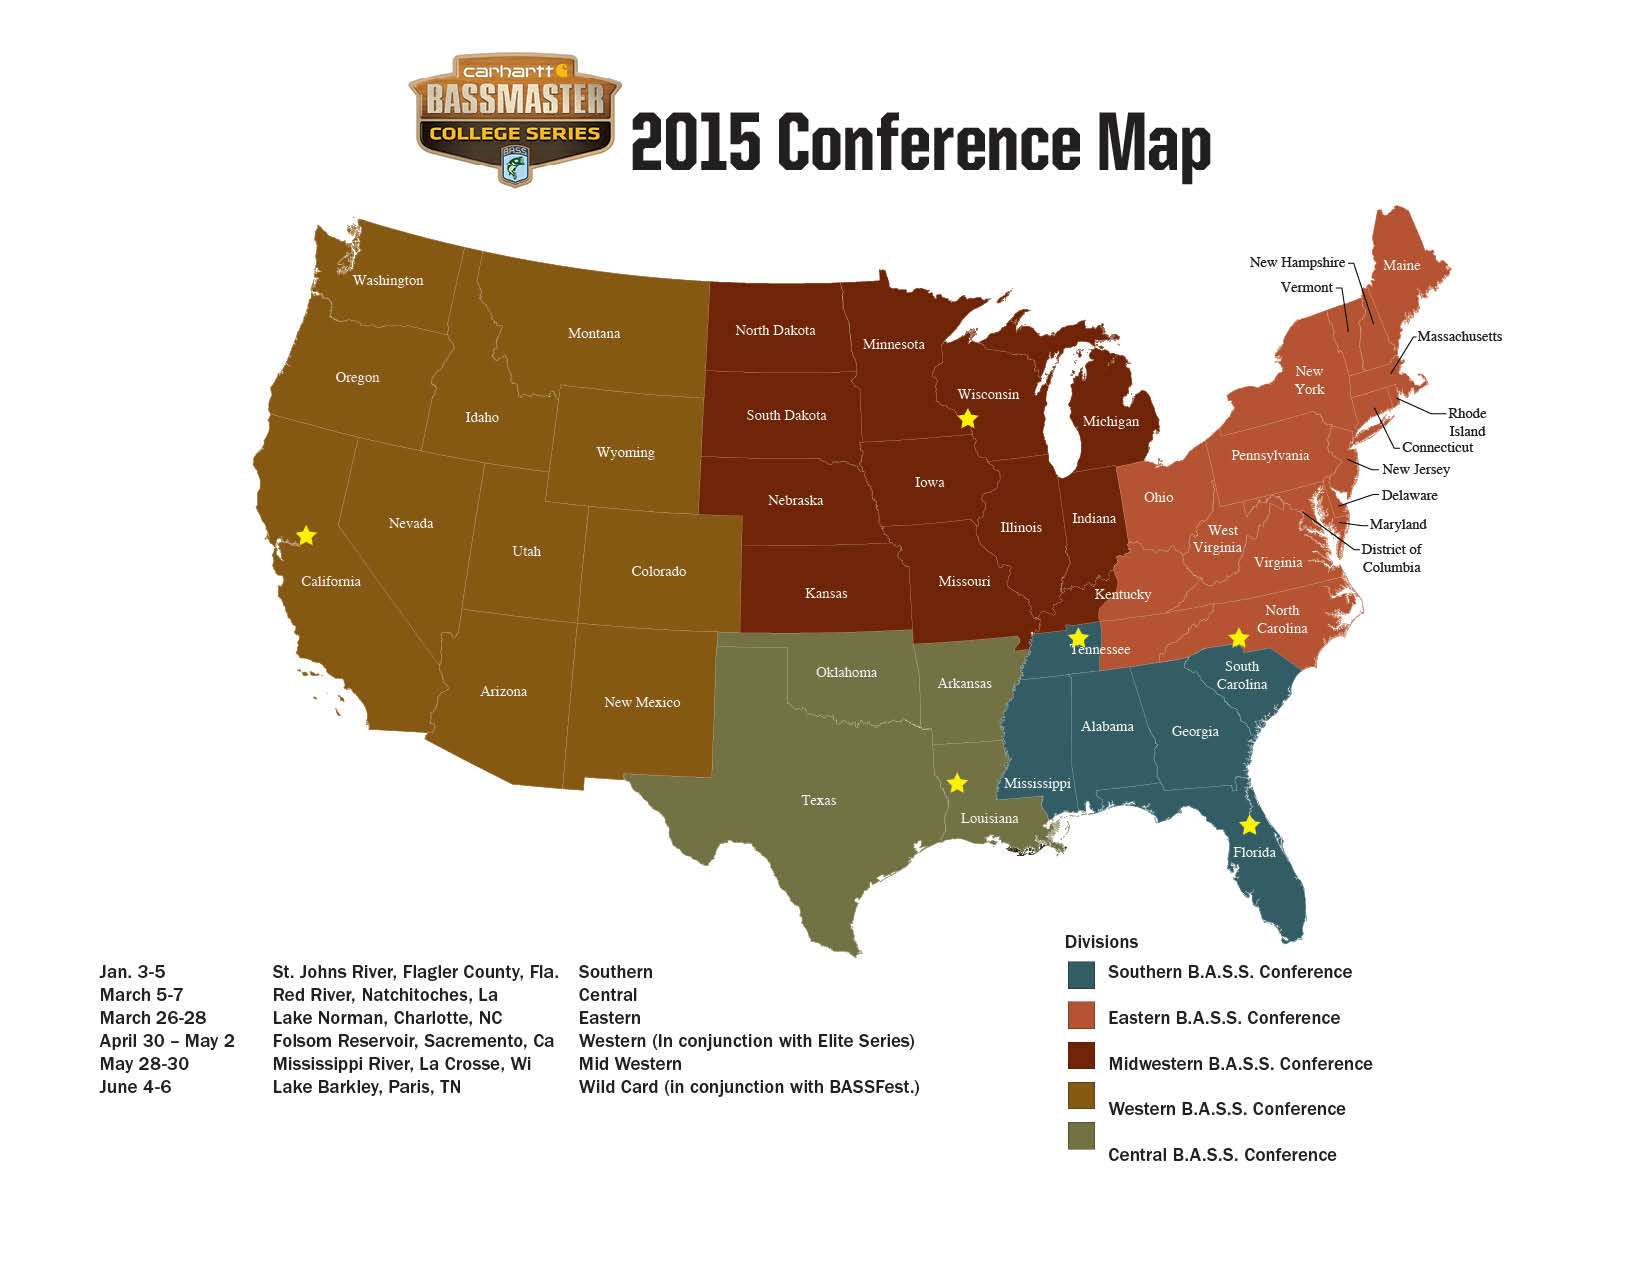 <p>The 2015 Carhartt Bassmaster College Series schedule features some famous fisheries from across the nation to challenge college anglers. Read more about the 2015 schedule <a href=